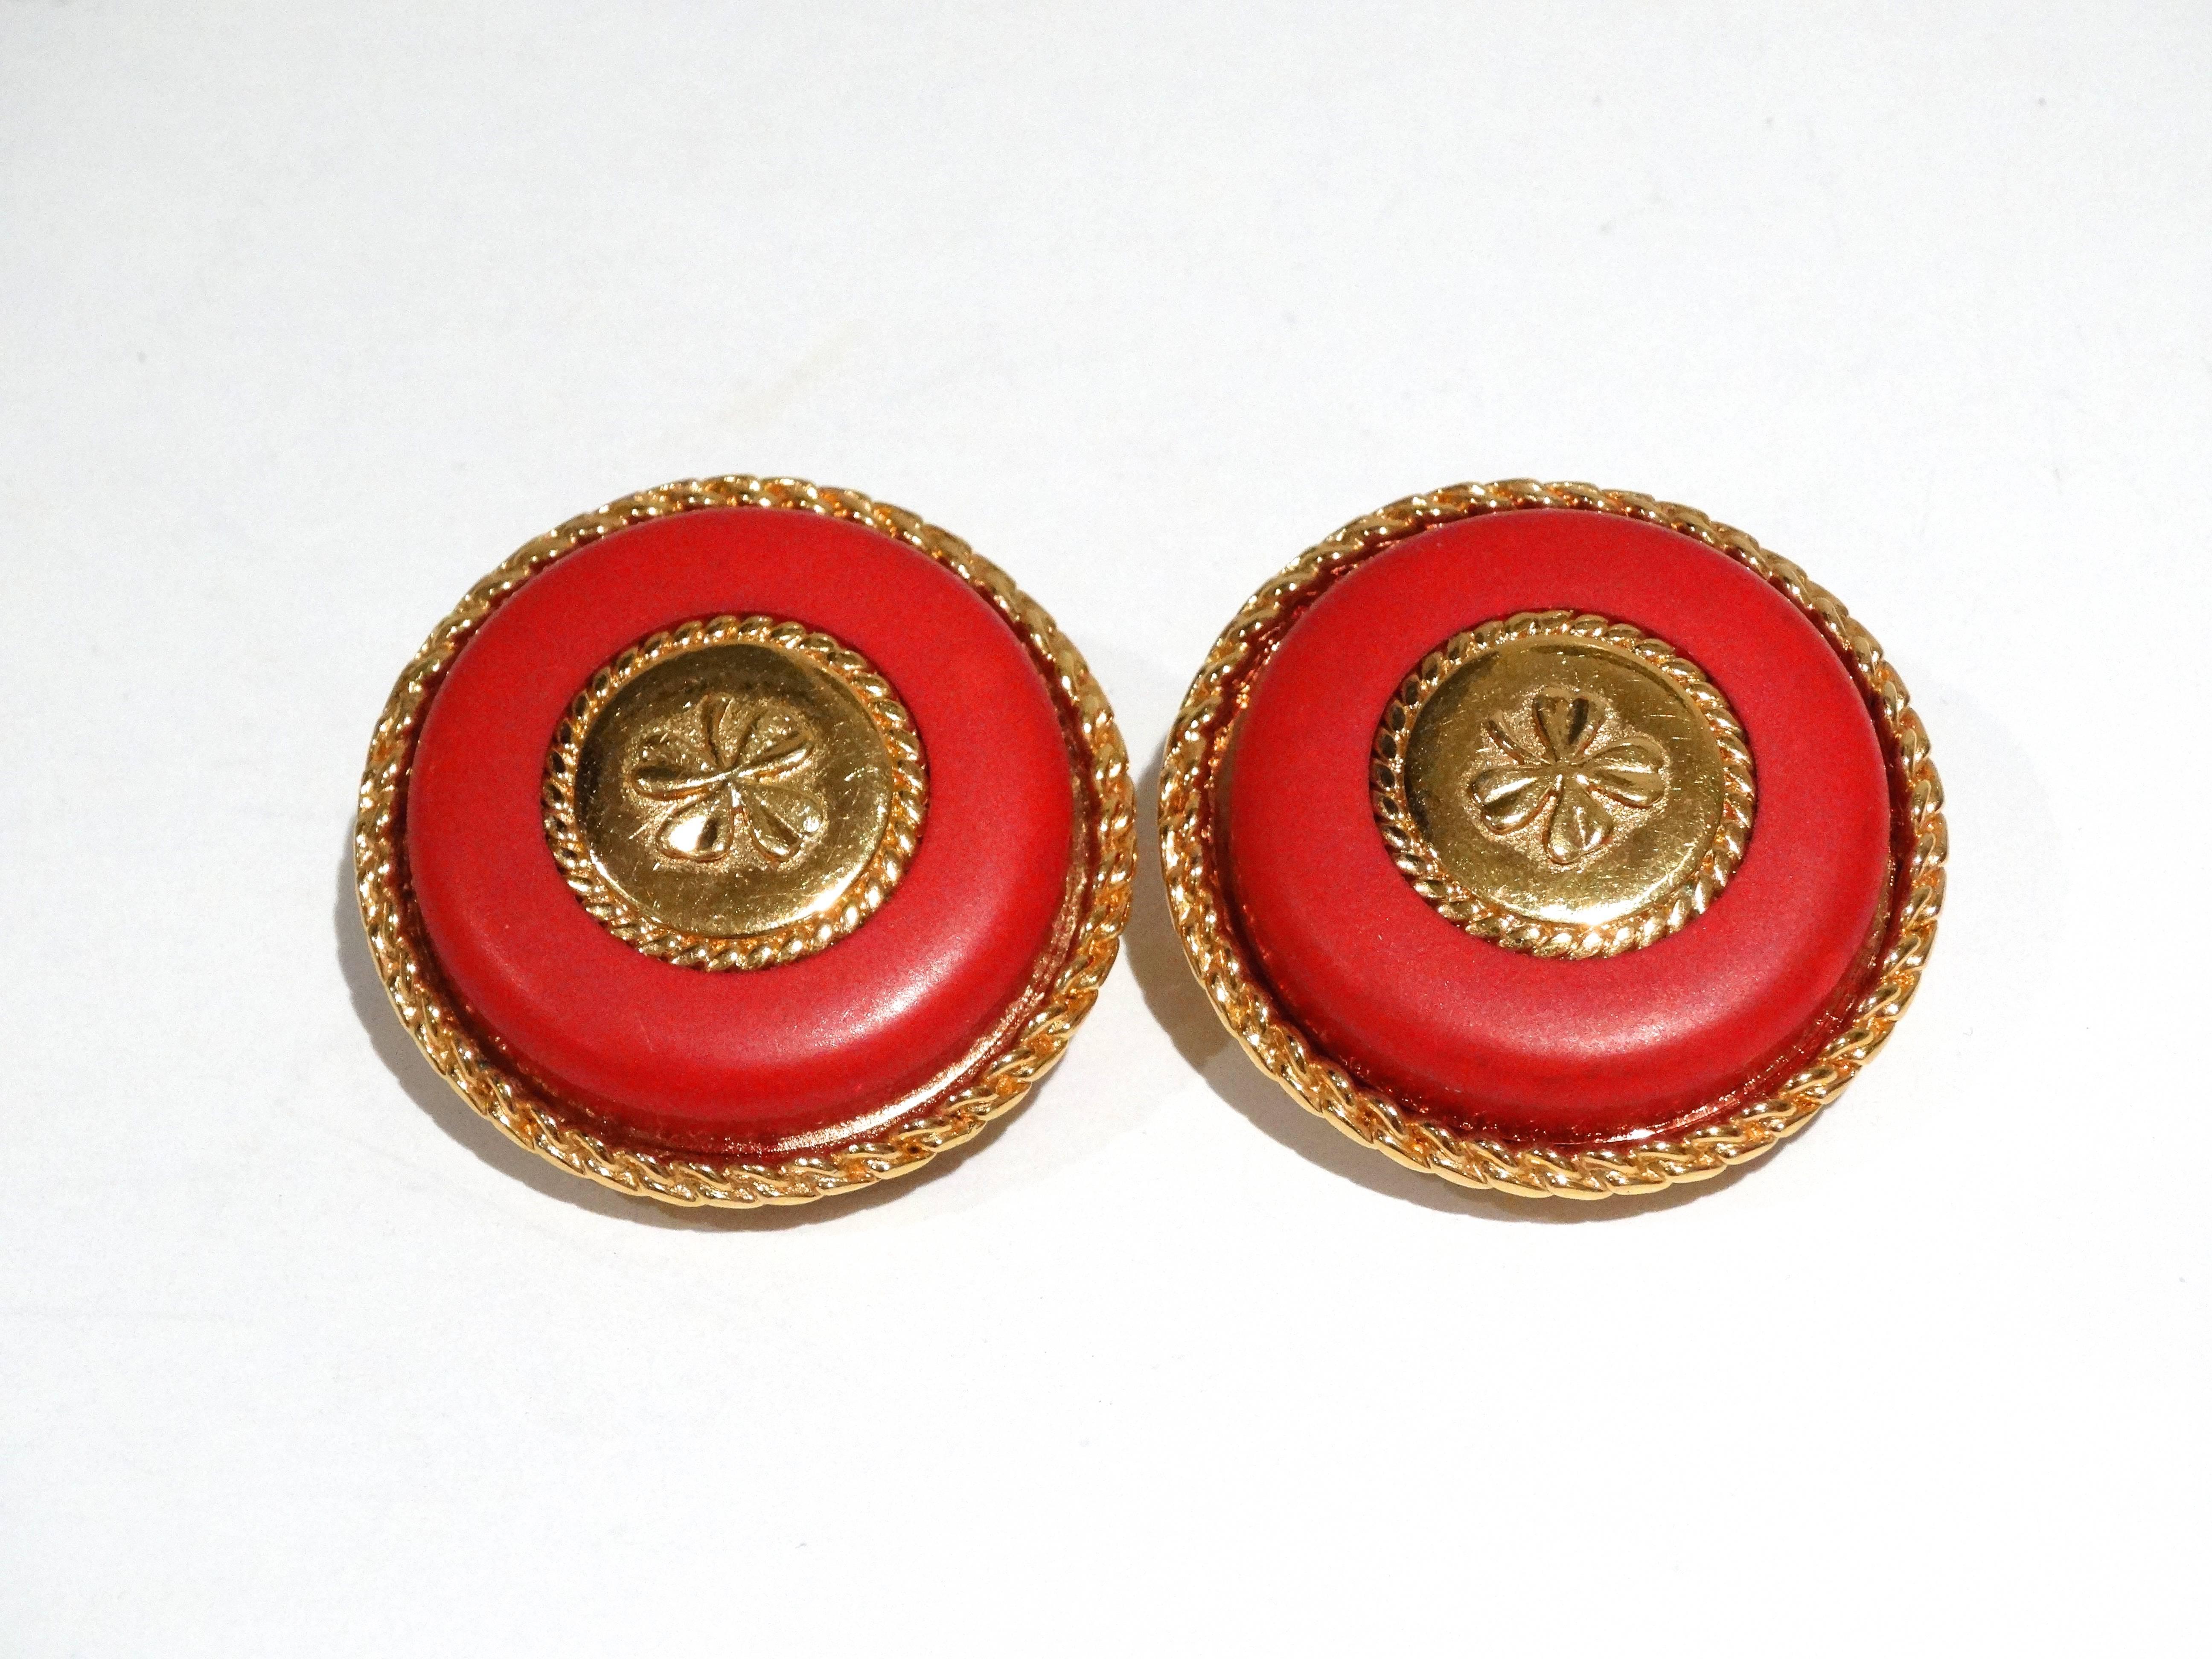 1980's gold tone metal clover earrings from Chanel featuring a center four leaf clover, chain trimming, red setting and a clip on backing. This piece is from a 1980's collection and will make a huge statement. 

Measurements:
Diameter: 1.5 inches